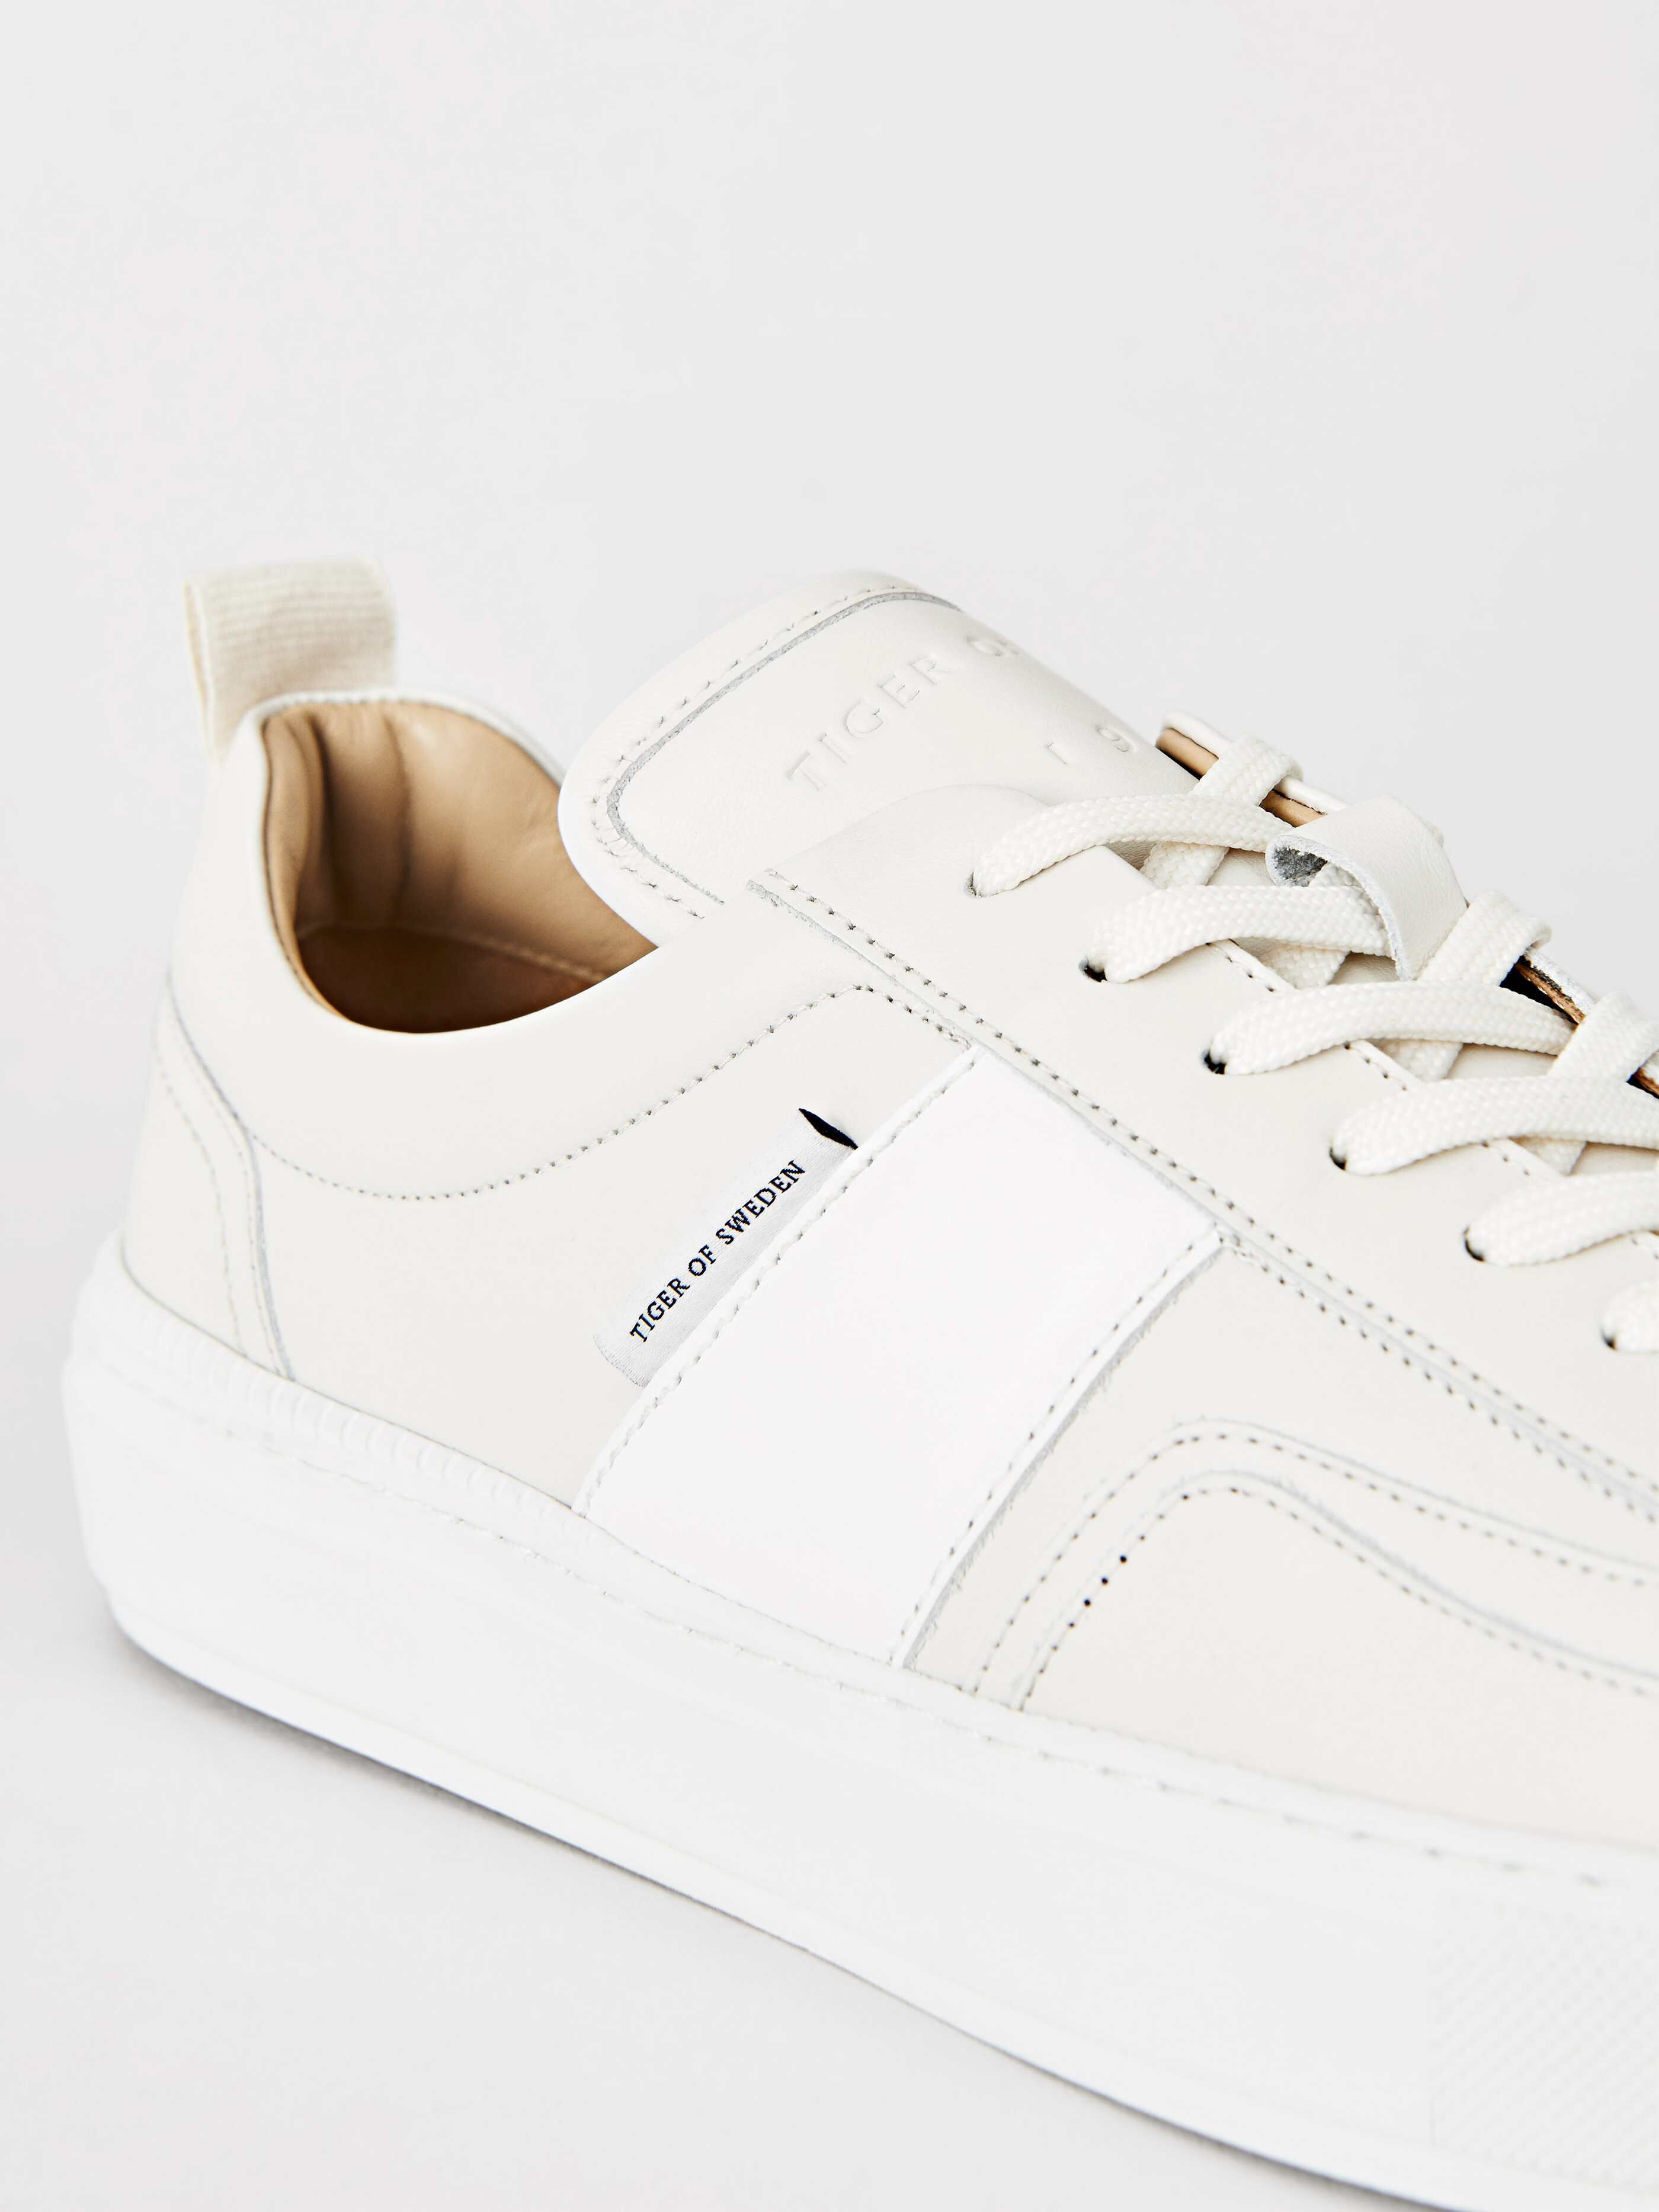 tiger of sweden white sneakers